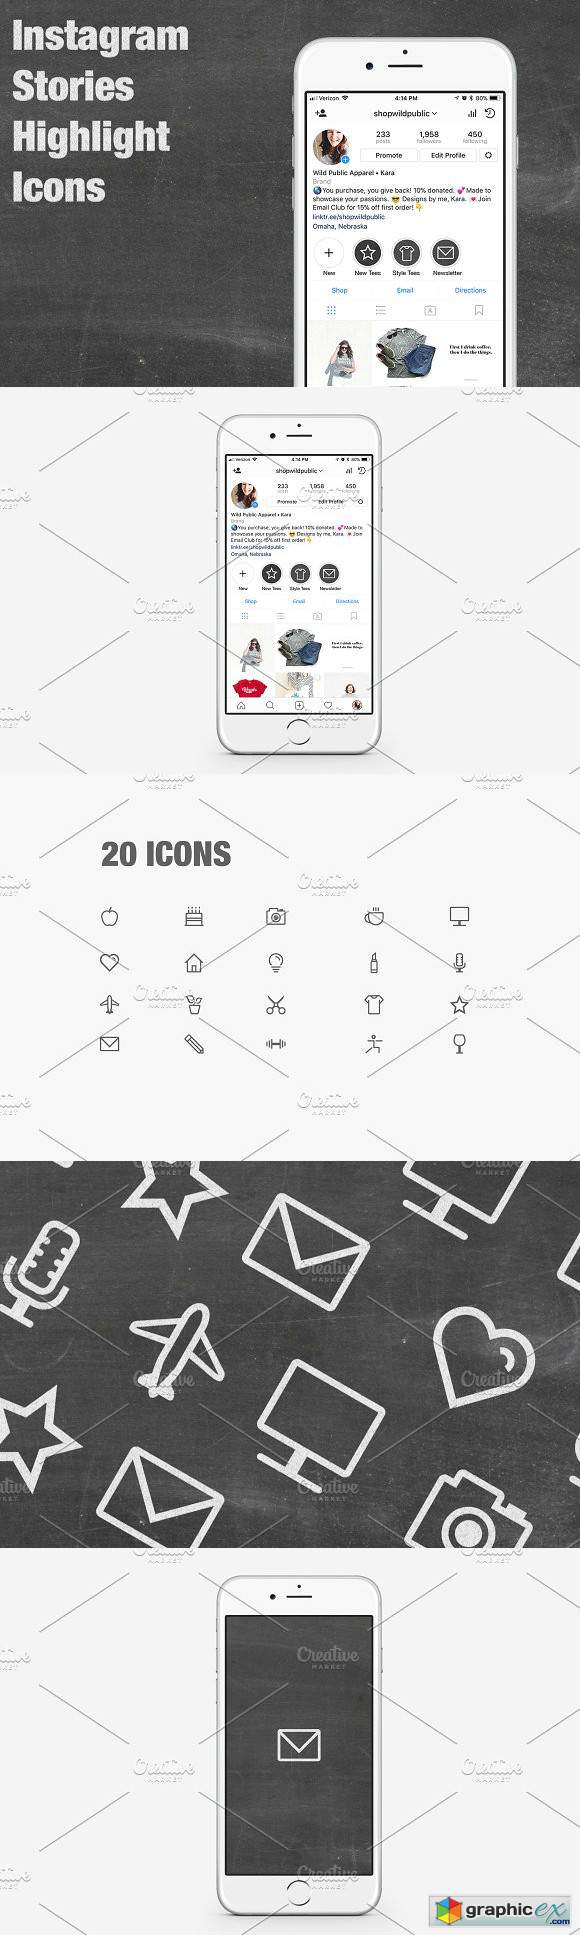 20 Chalkboard Insta Stories Icons